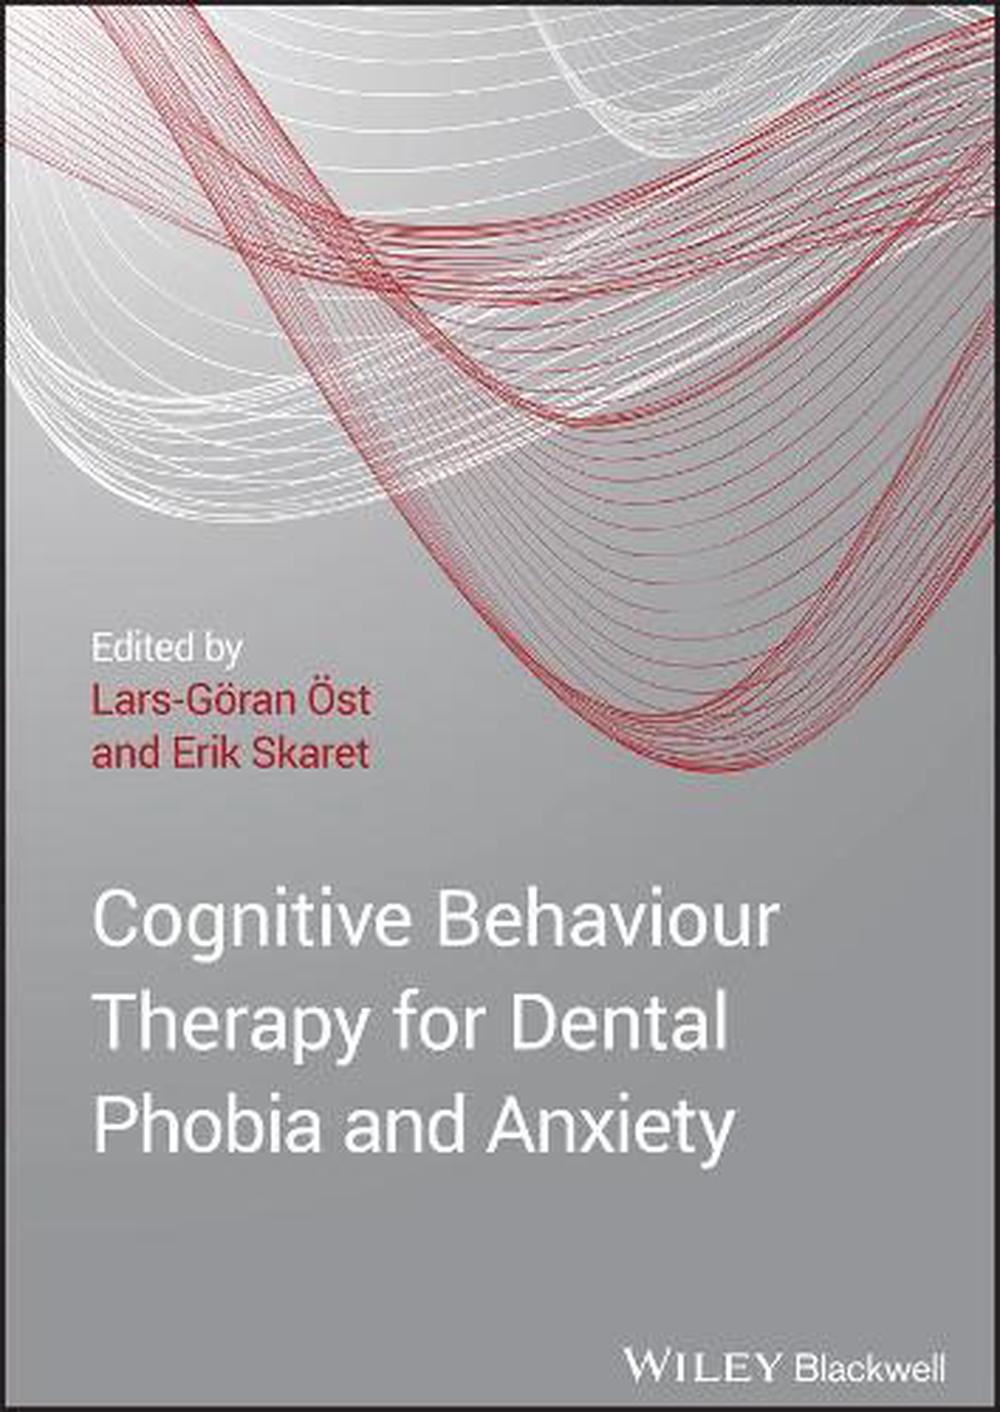 Cognitive Behavioral Therapy for Dental Phobia and Anxiety by Lars